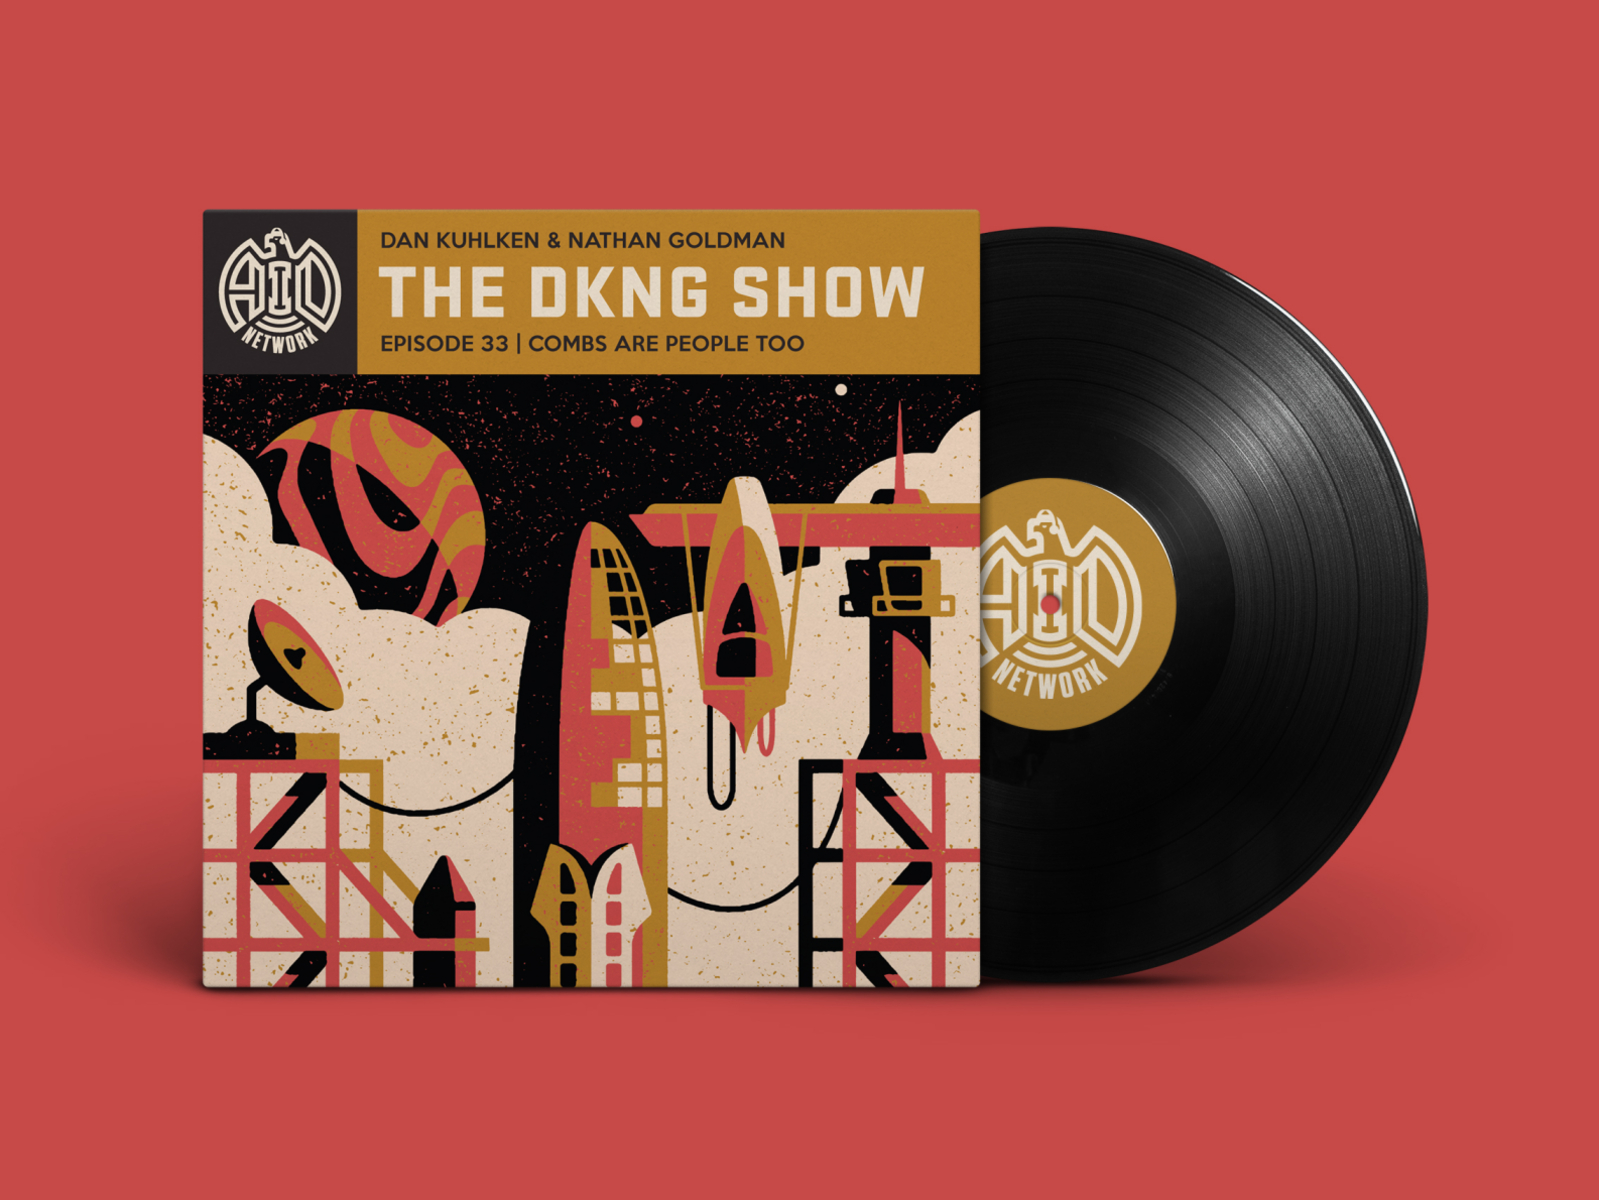 The DKNG Show (Episode 33) podcast adventures in design planet space rocket vinyl dkng studios vector dkng nathan goldman dan kuhlken